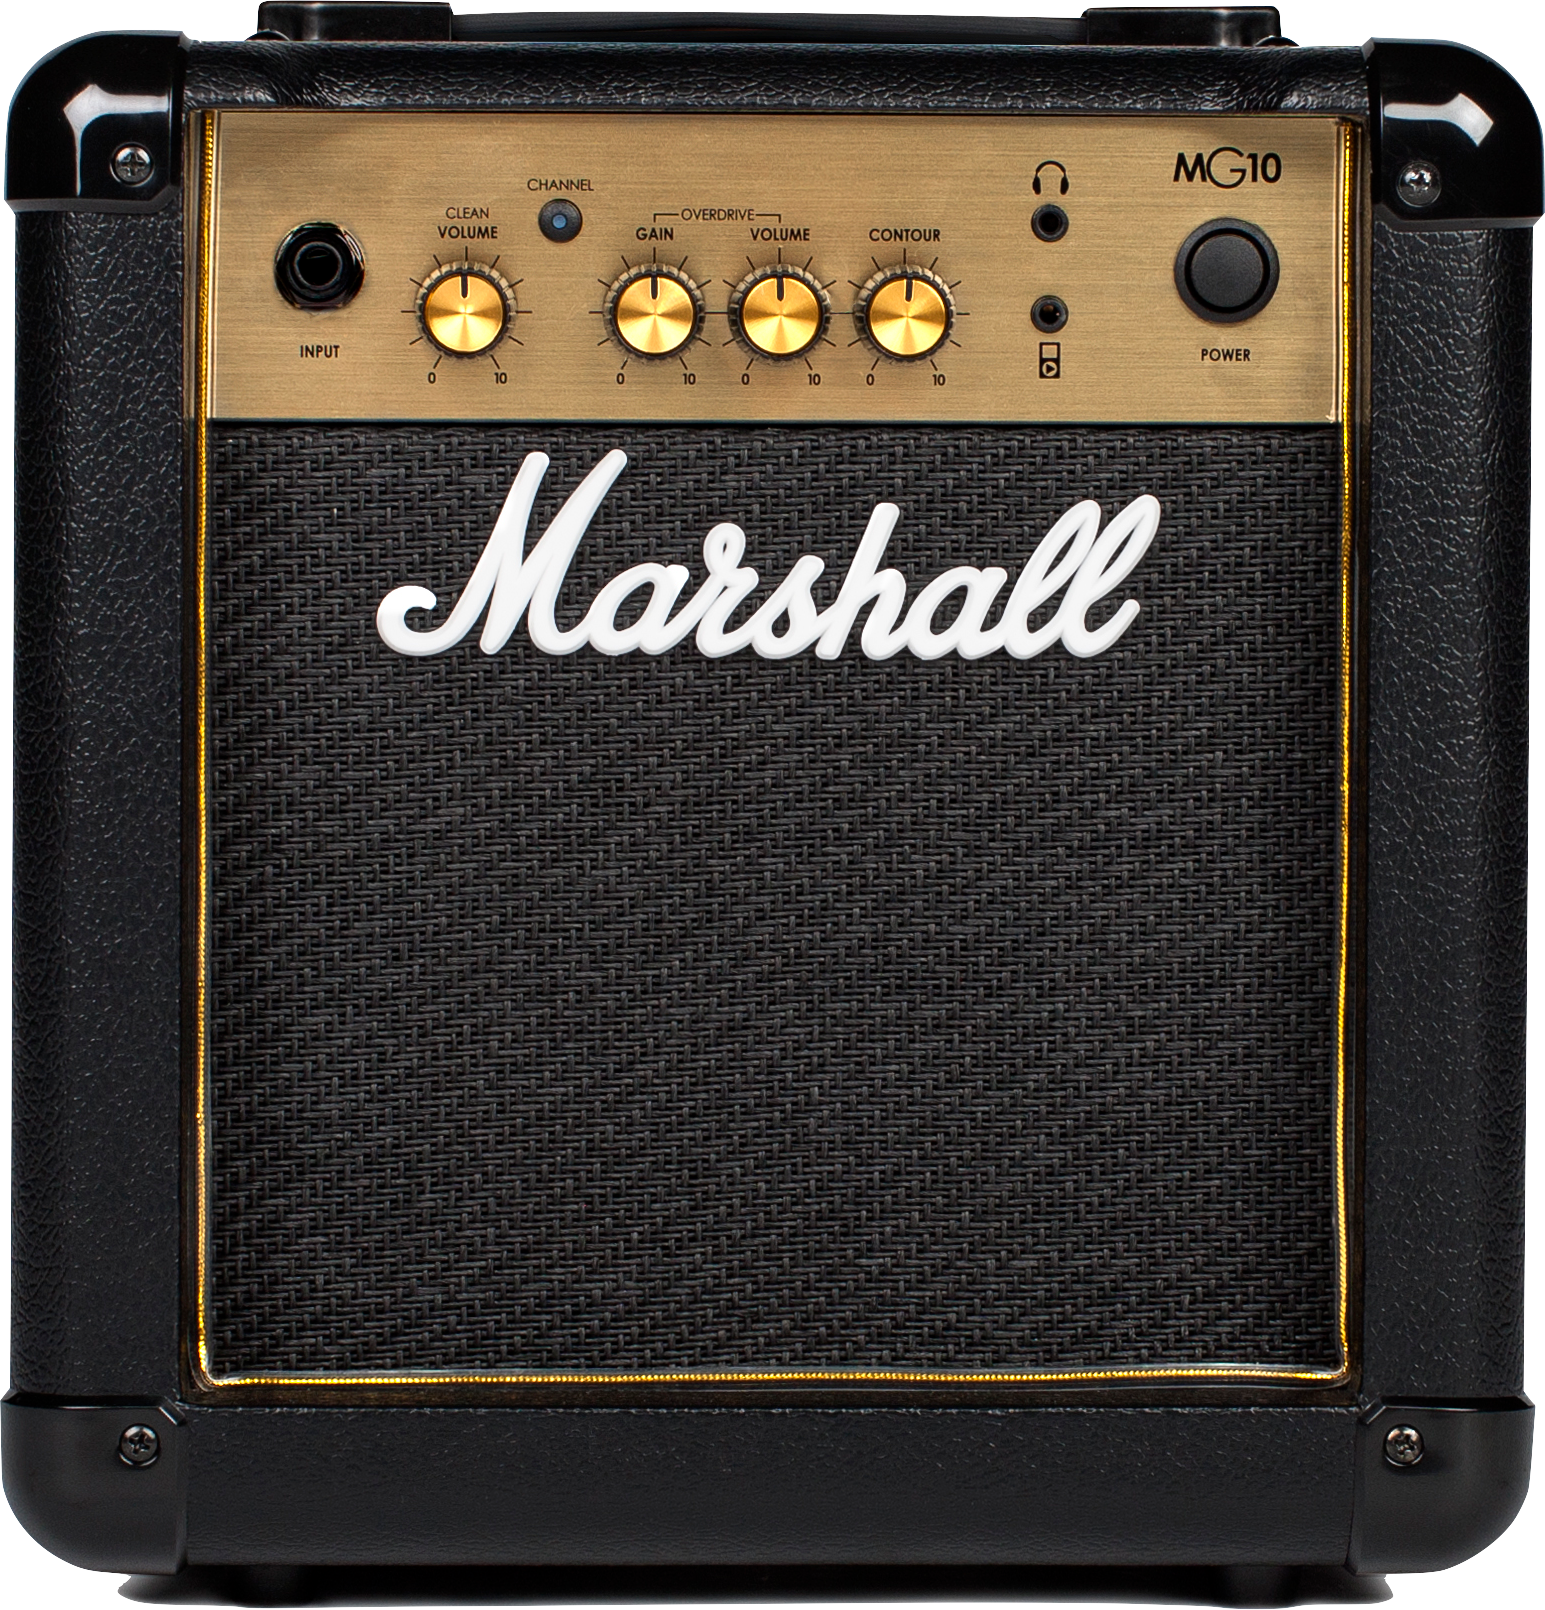 Marshall Mg10g Gold Combo 10 W - Ampli Guitare Électrique Combo - Variation 1